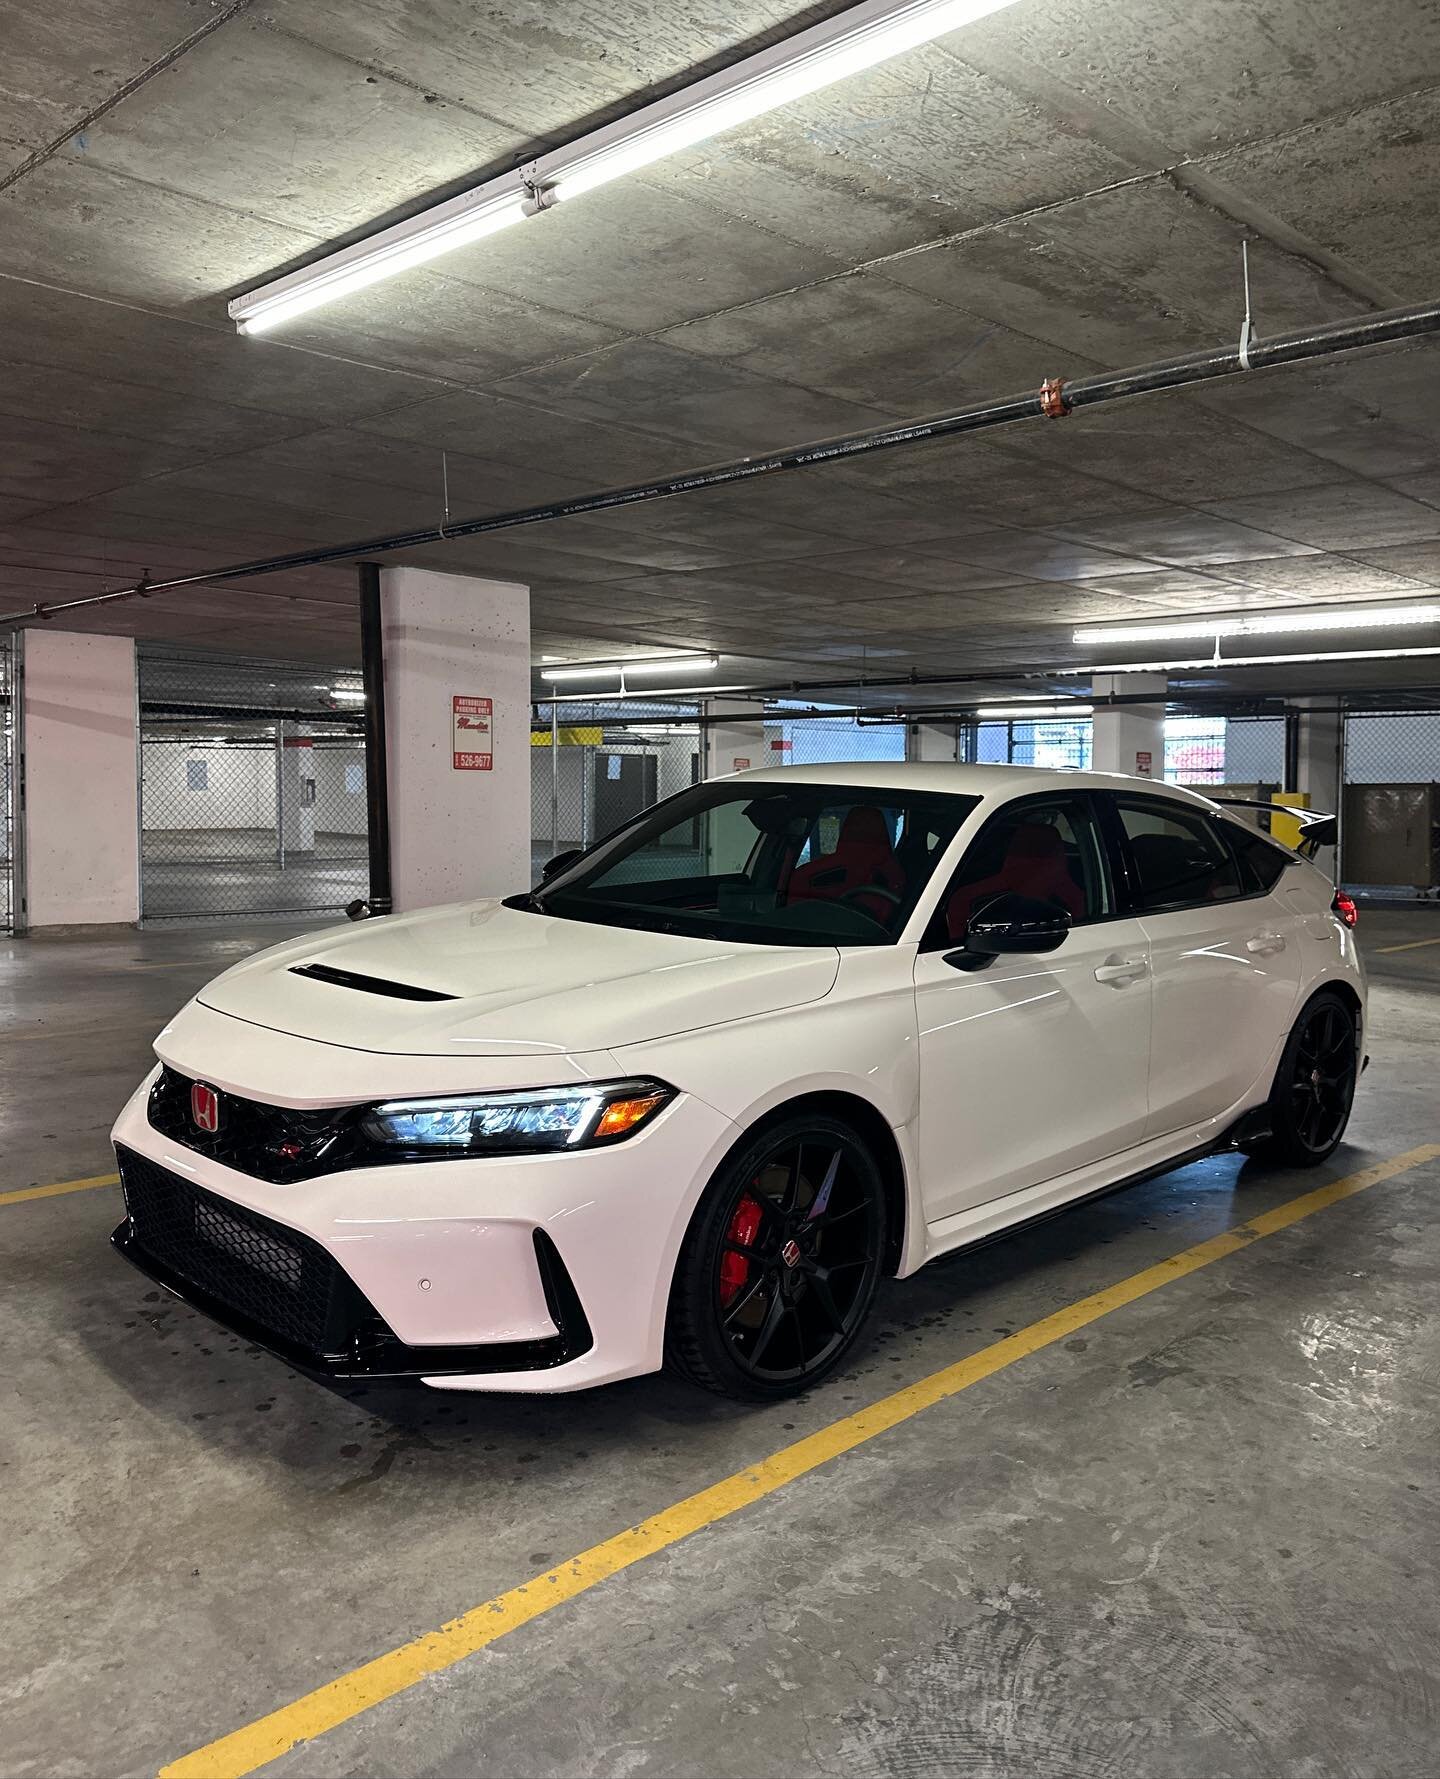 Honda Civic Type R 

Came in for our Signature Silver Package ✅

After a thorough detailing this FL5 Type R was glistening ✨

For inquiries or bookings

Phone: 604-404-7225
Email: Washiewashiedetailing@gmail.com
Website: Washiewashie.ca